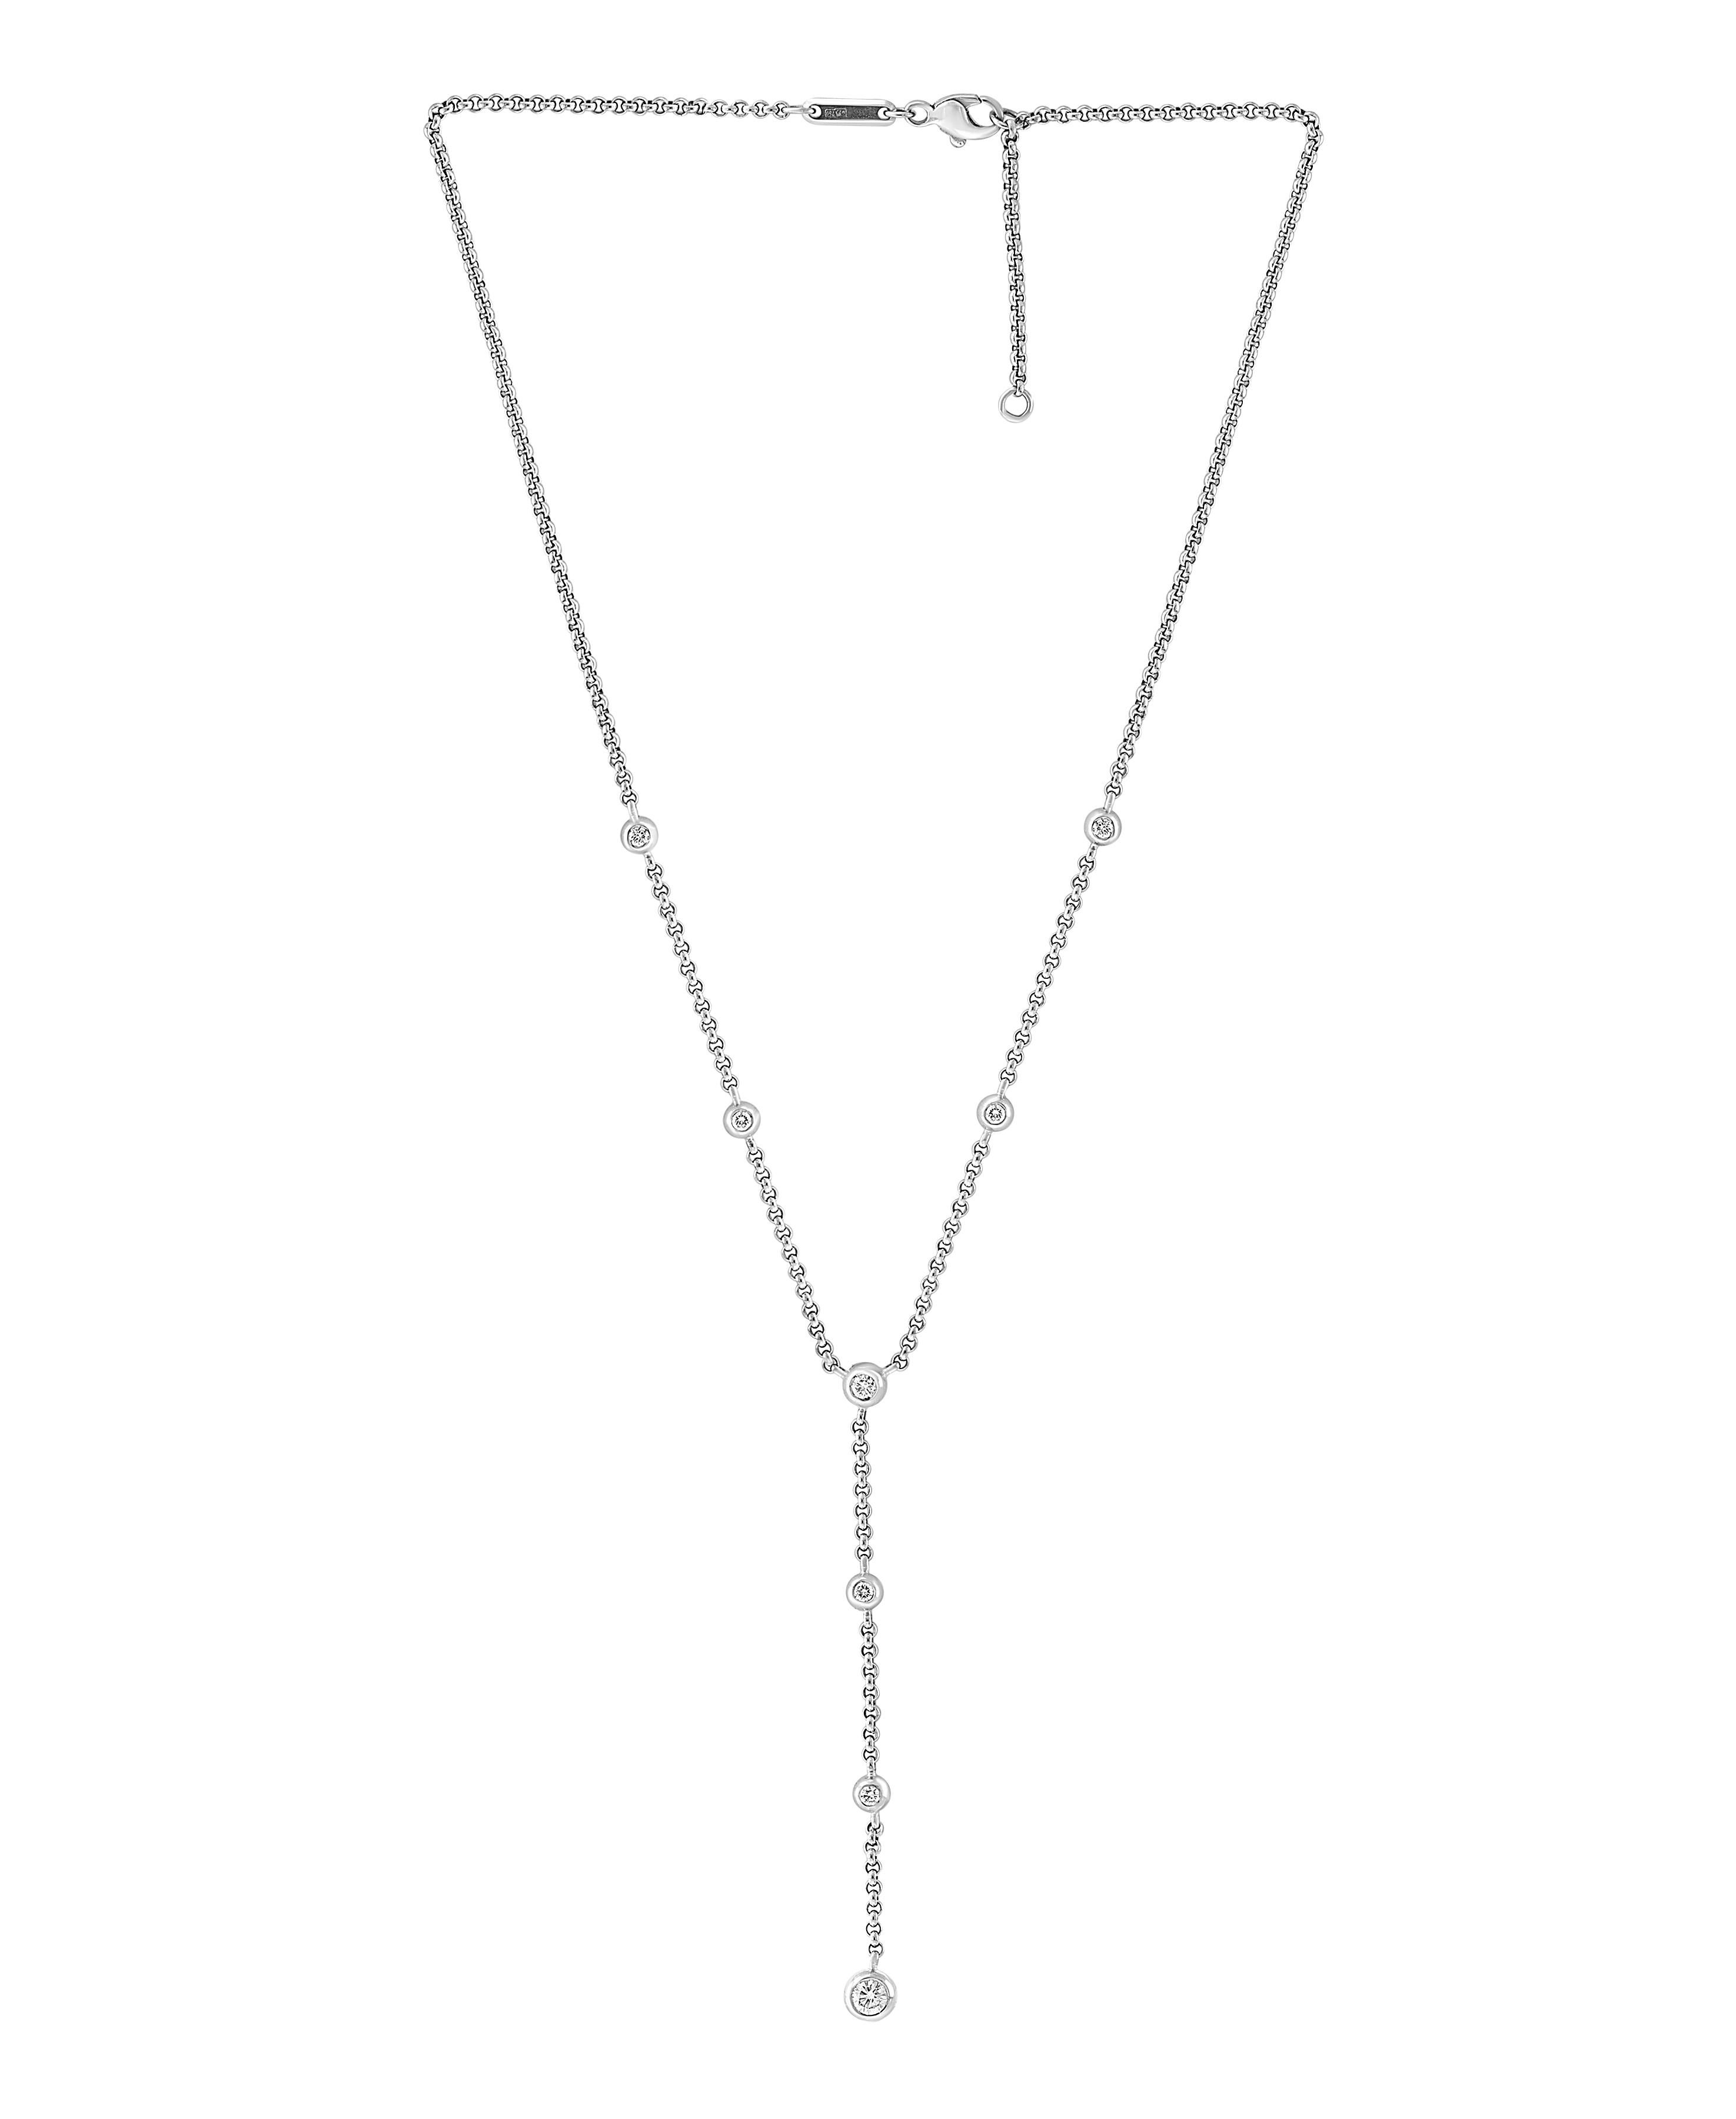 Chopard 1.4 Carat Diamond 18 Karat White Gold  Diamonds Y Drop Necklace
Weight of the gold 13.5 gm
With 8 pavé set diamond Y drop Necklace
Diamonds-by-the-yard style chain
With 8 round brilliant cut diamonds weighing approximately 1.4 carats total,